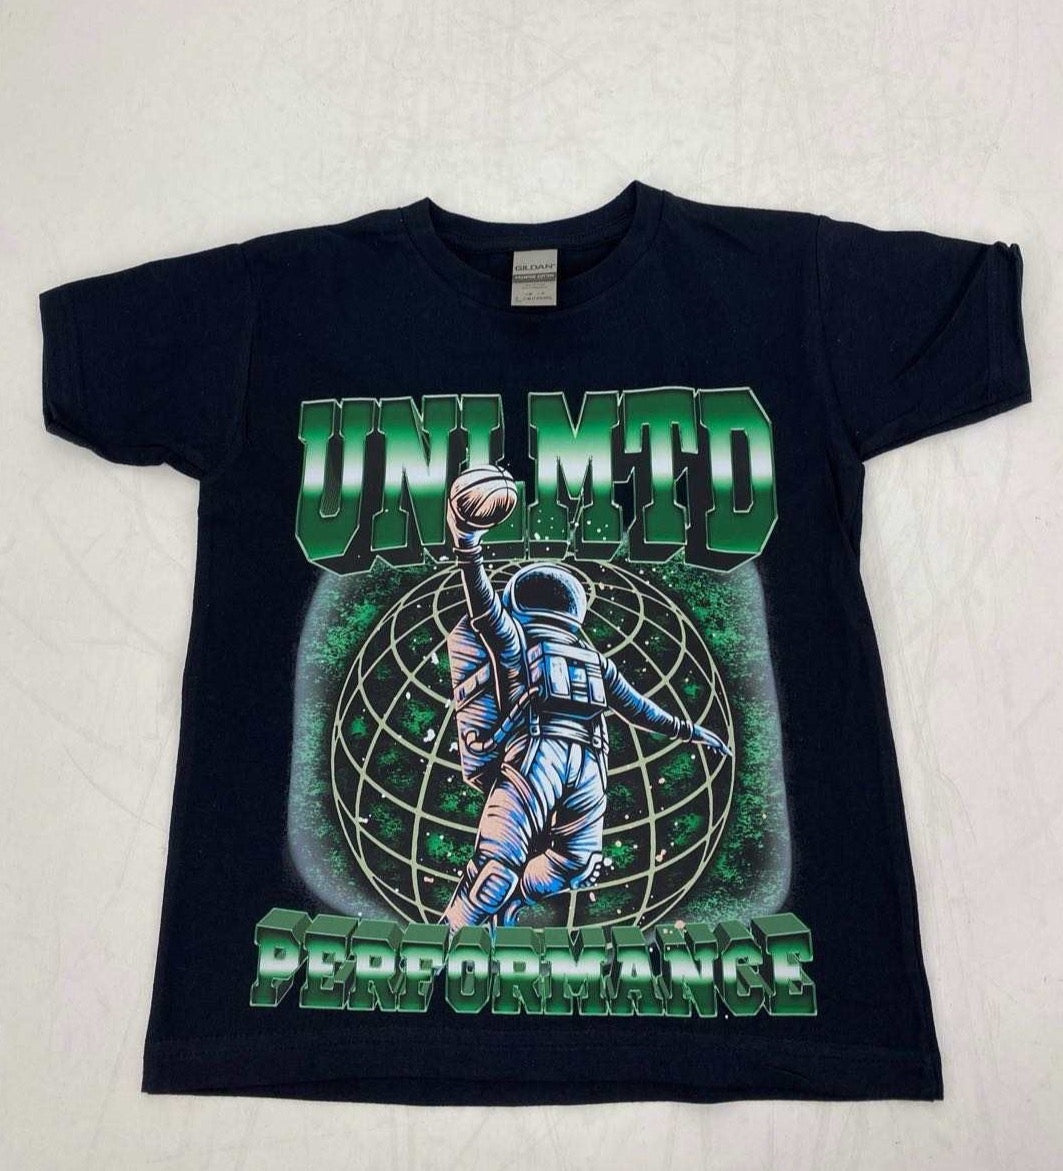 PREORDER “Live Life With No Limits” Youth T-Shirt